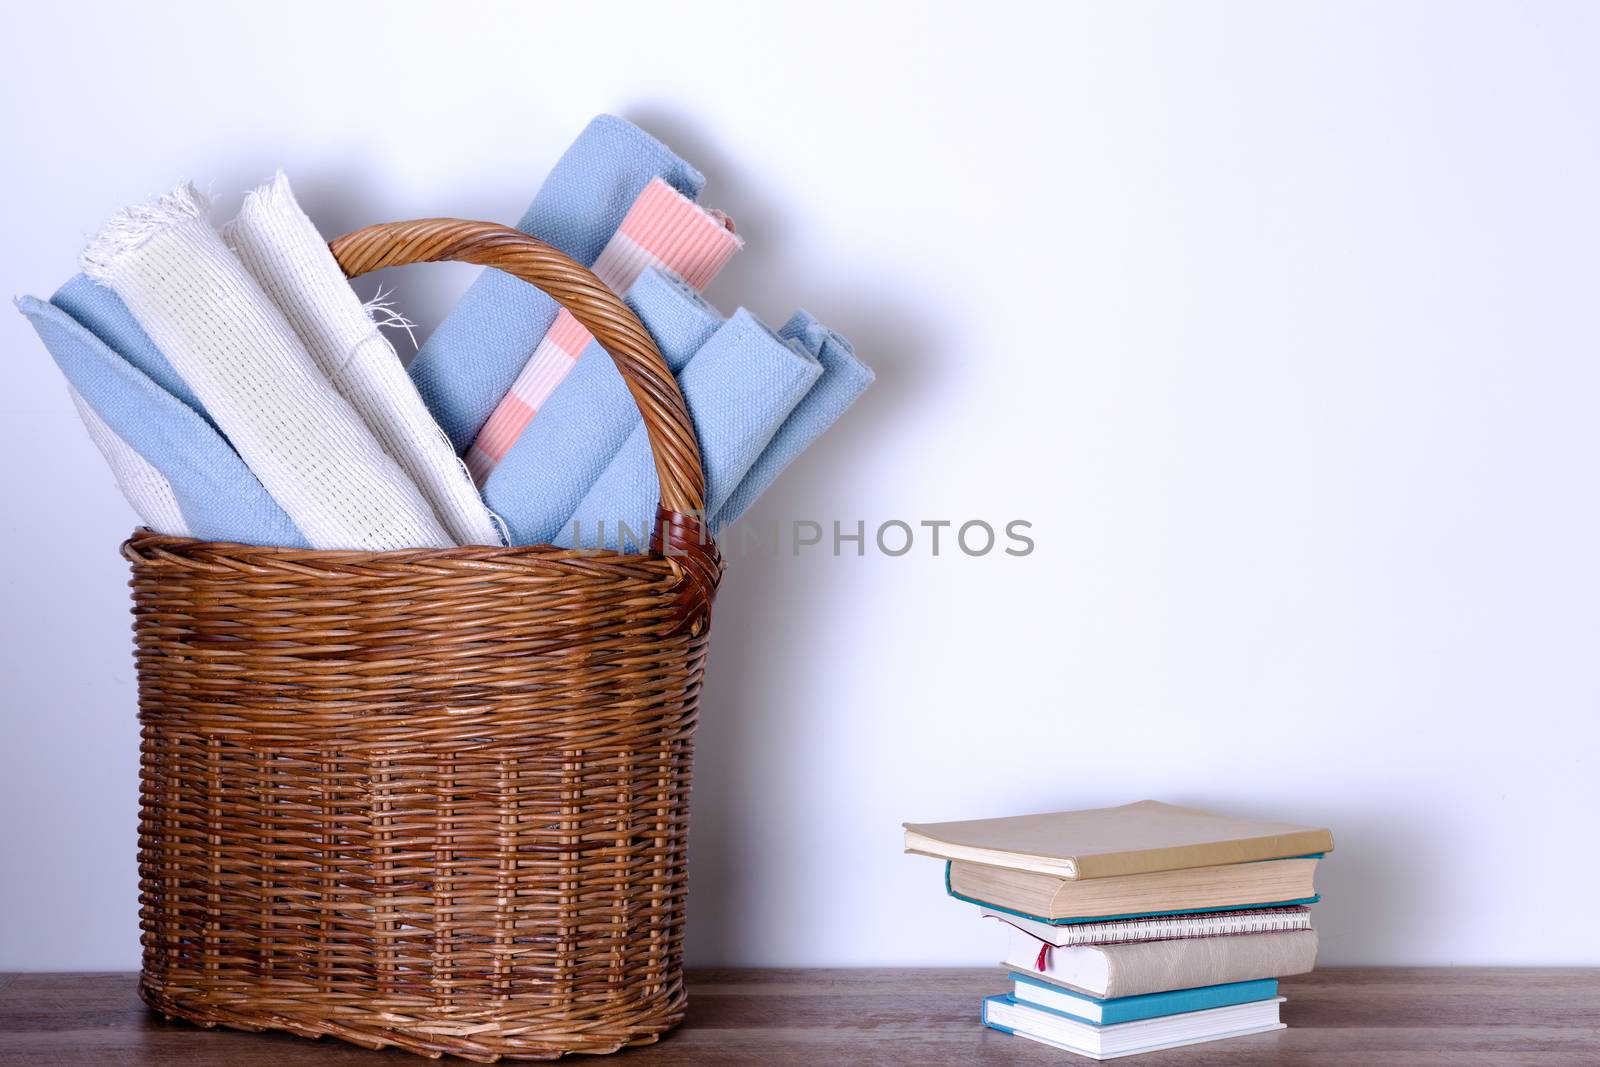 Worn Out School Rugs in a Basket and Piled Books Against White Wall with Copy Space.